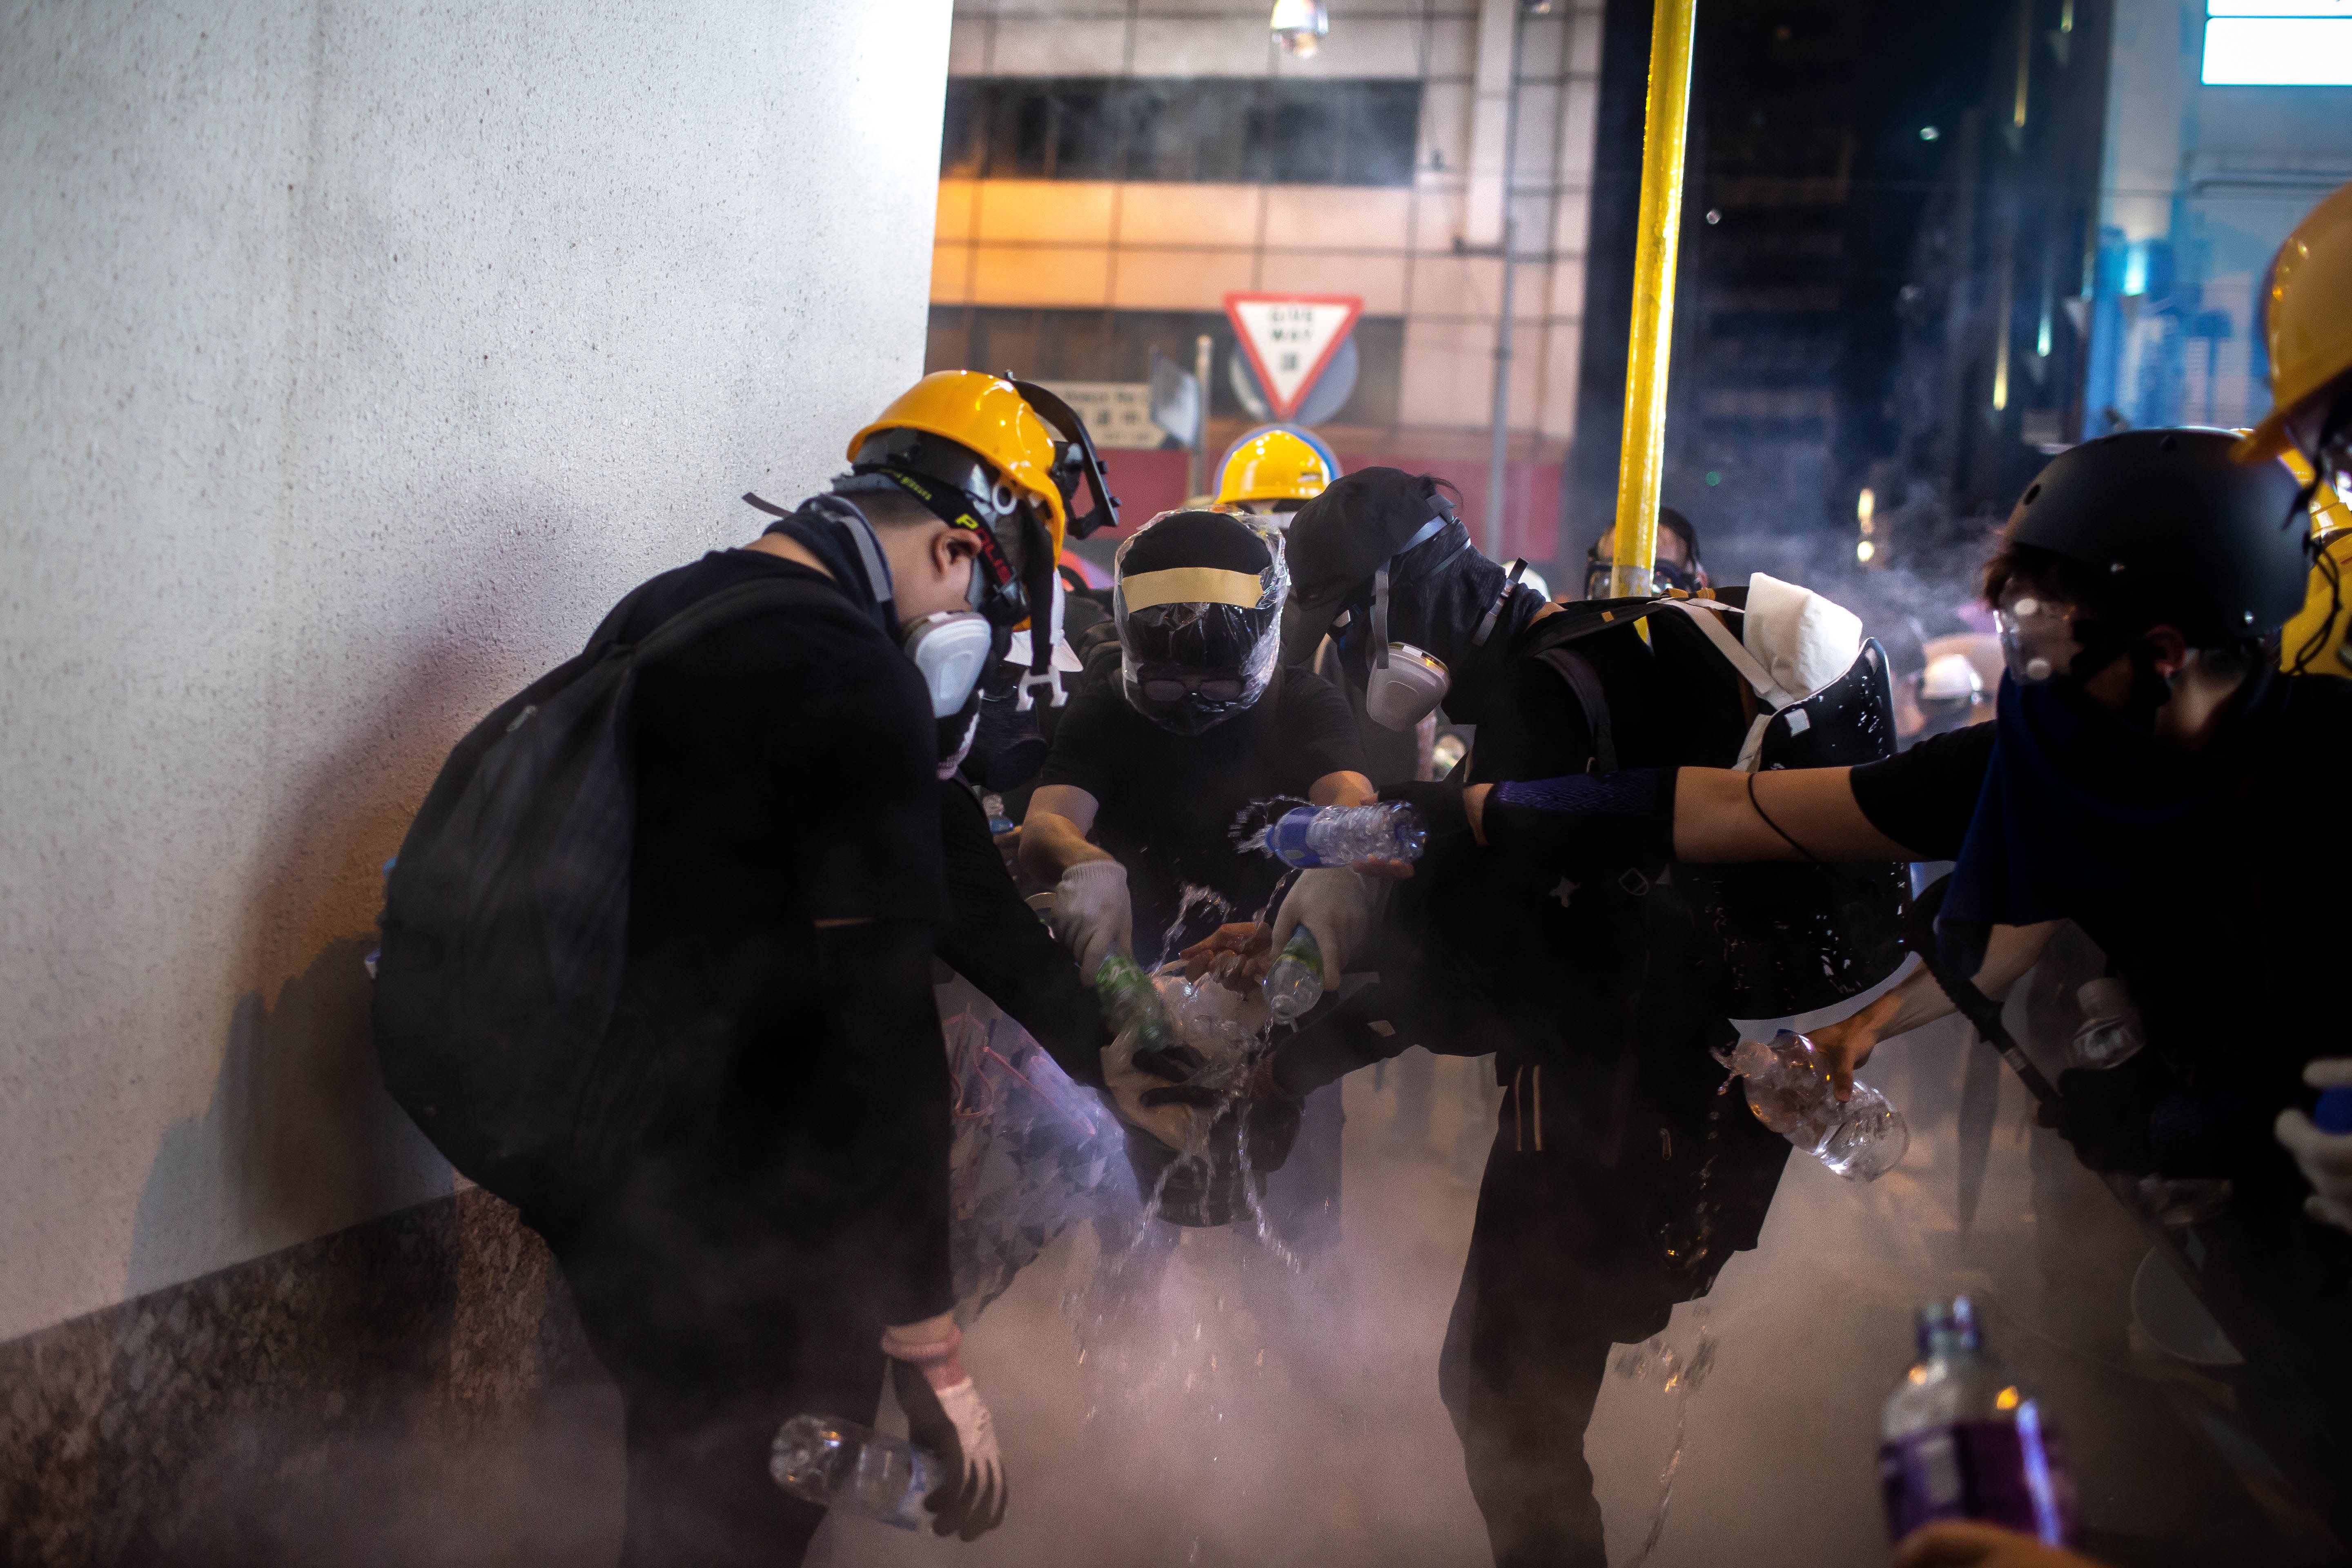 Protesters extinguish a tear gas canister by covering it and pouring on water during a demonstration.